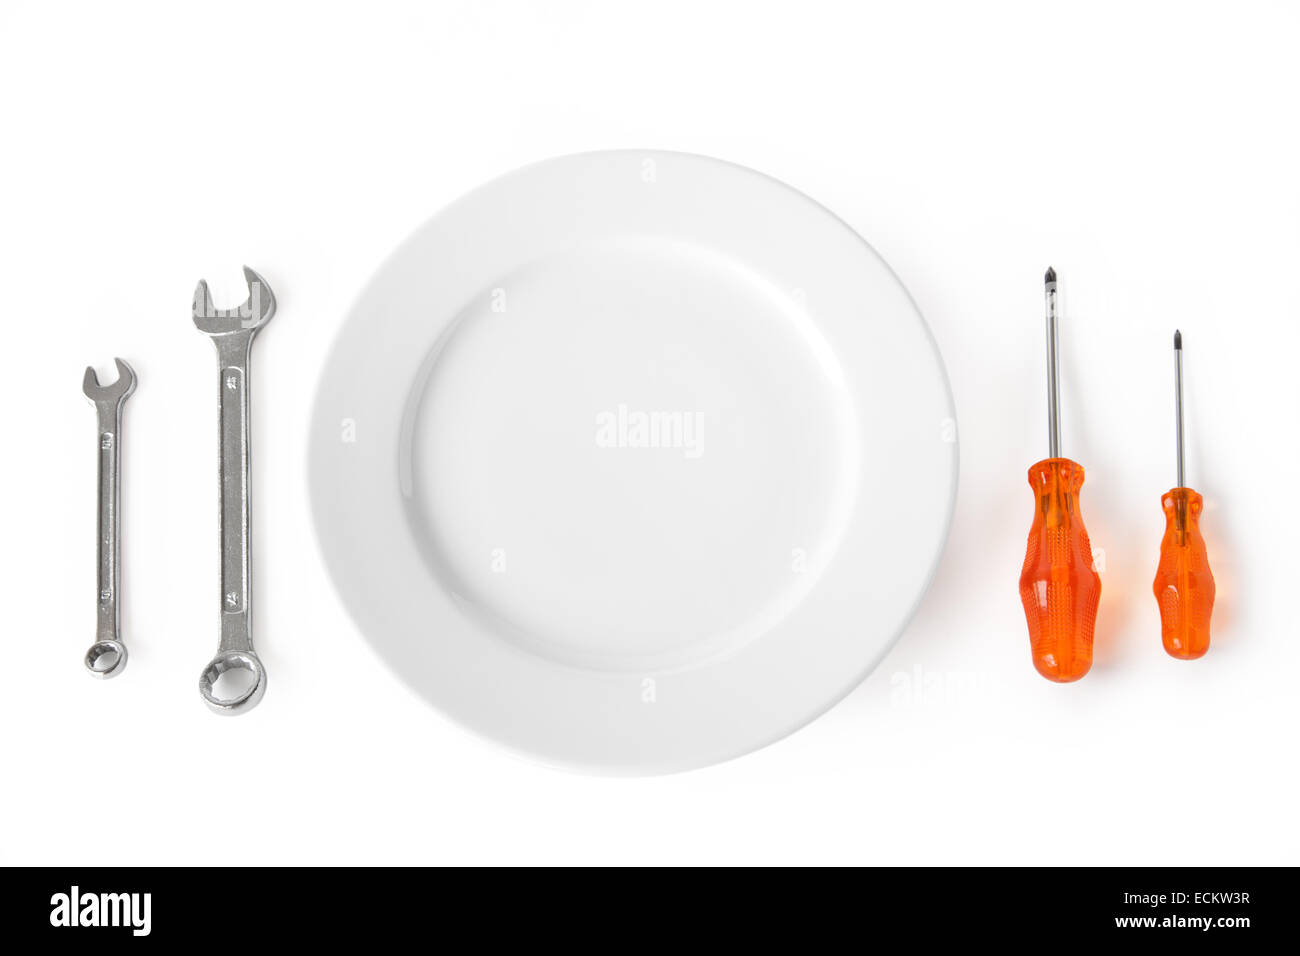 Round white plate with wrenches and screwdrivers Stock Photo